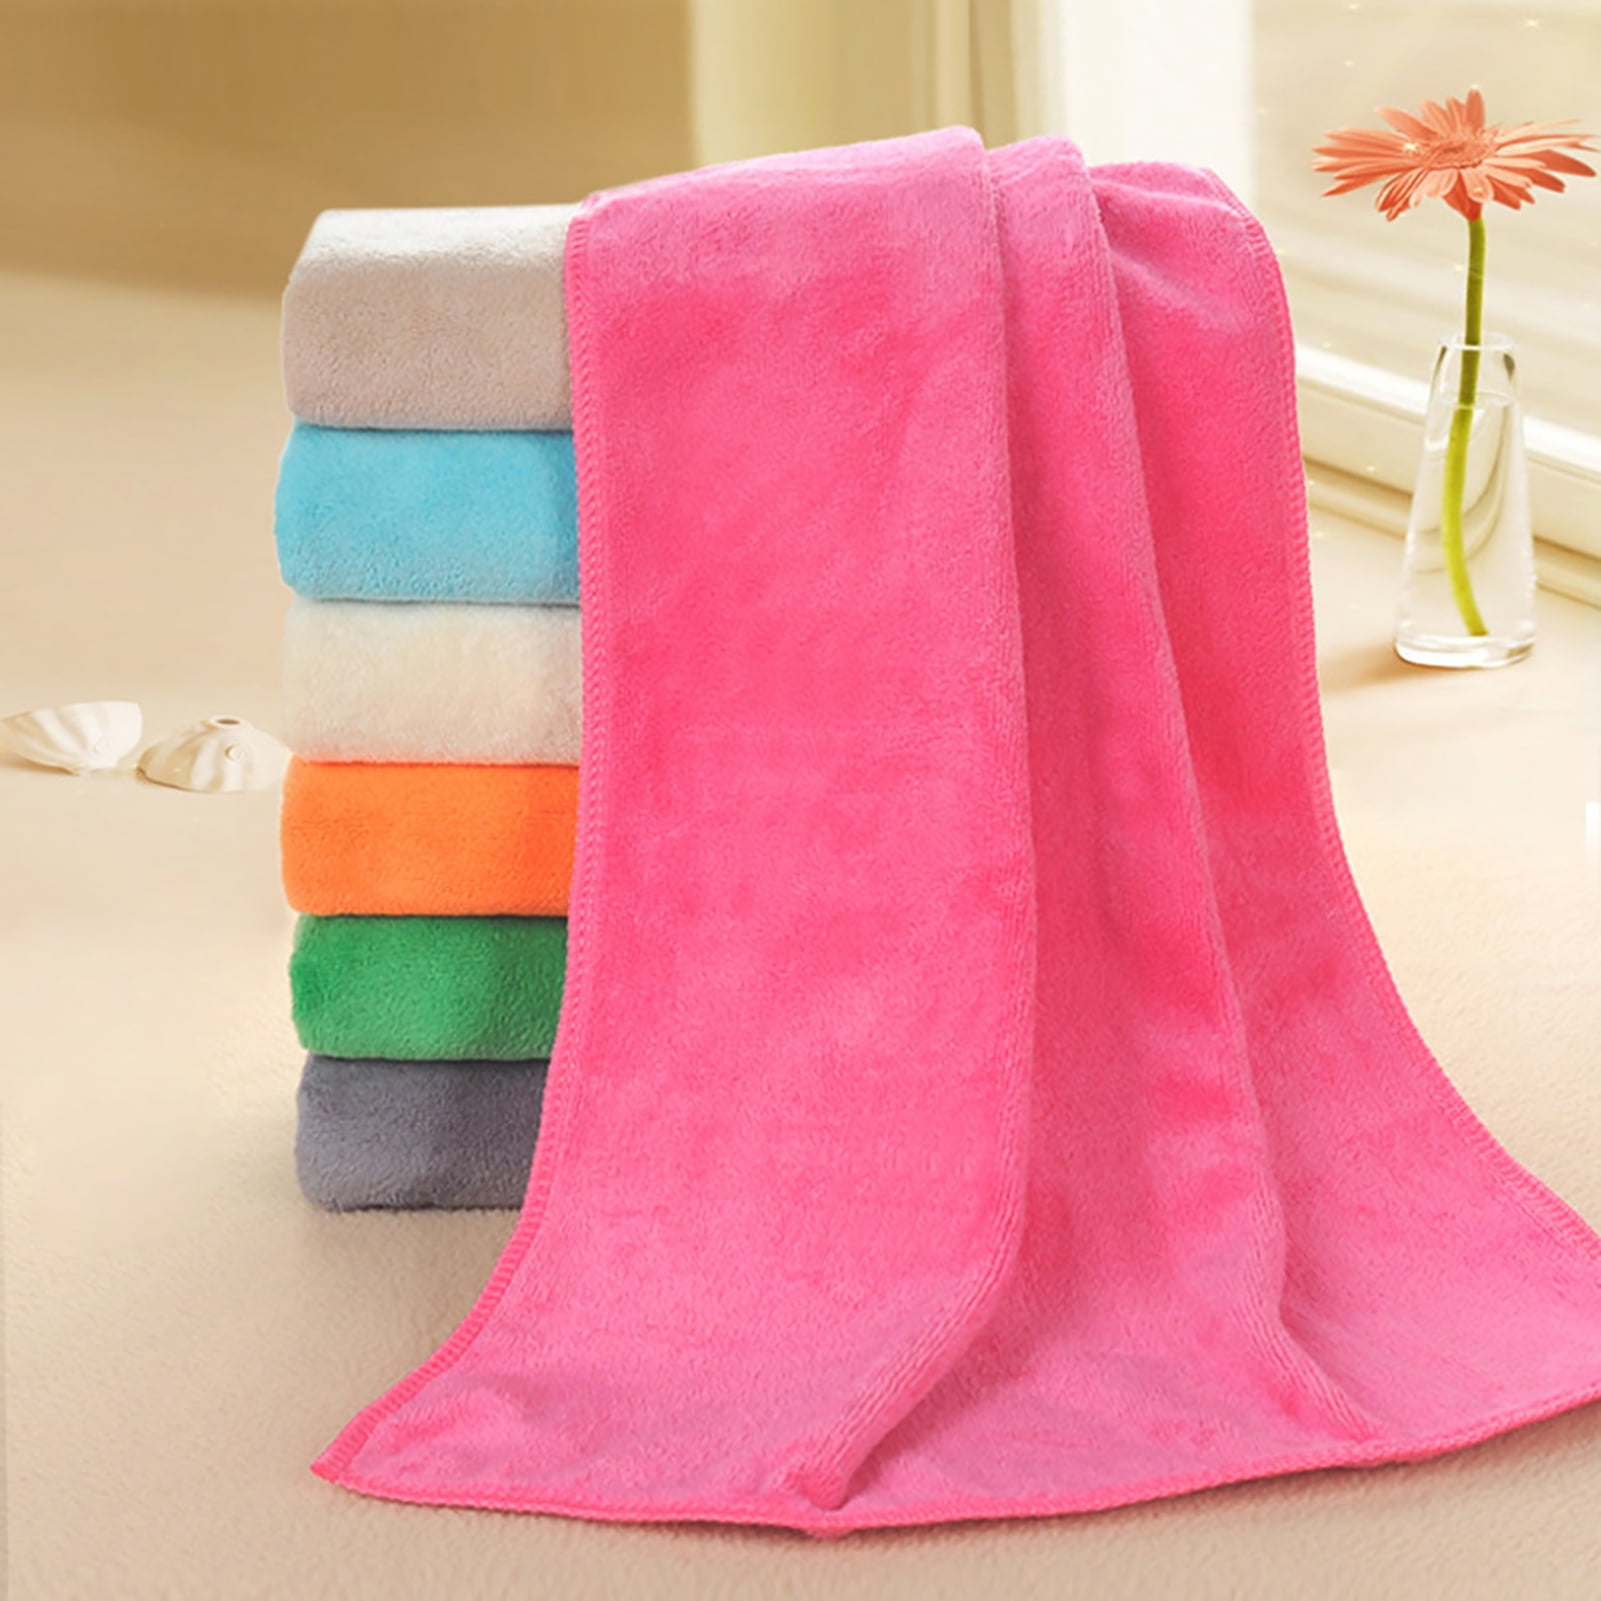 Microfiber Towel Absorbent Quick Dry Shower Salon Barber Shop Hair Drying Sight 